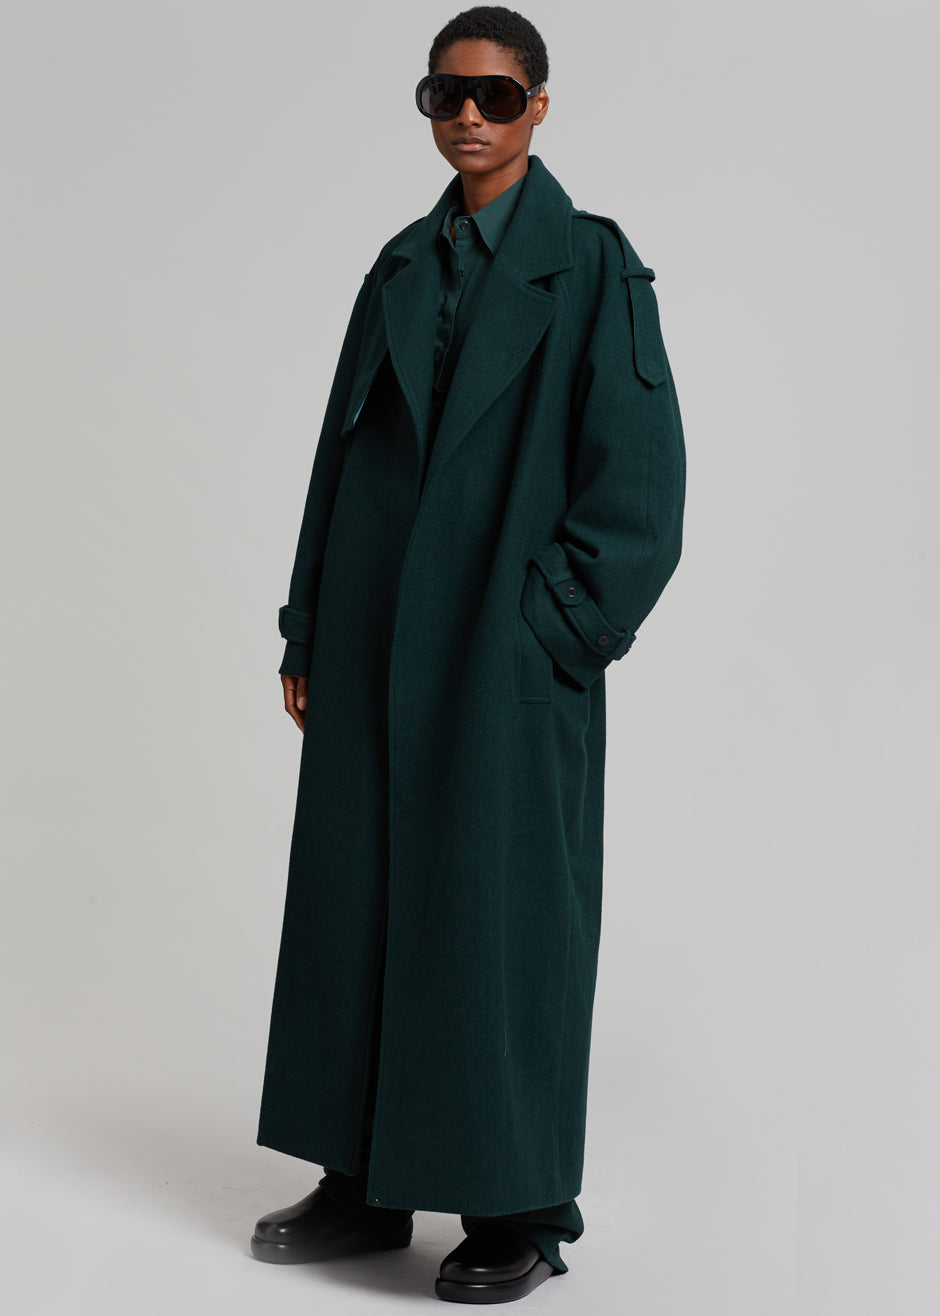 Suzanne Wool Trench Coat - Bottle Green - 5